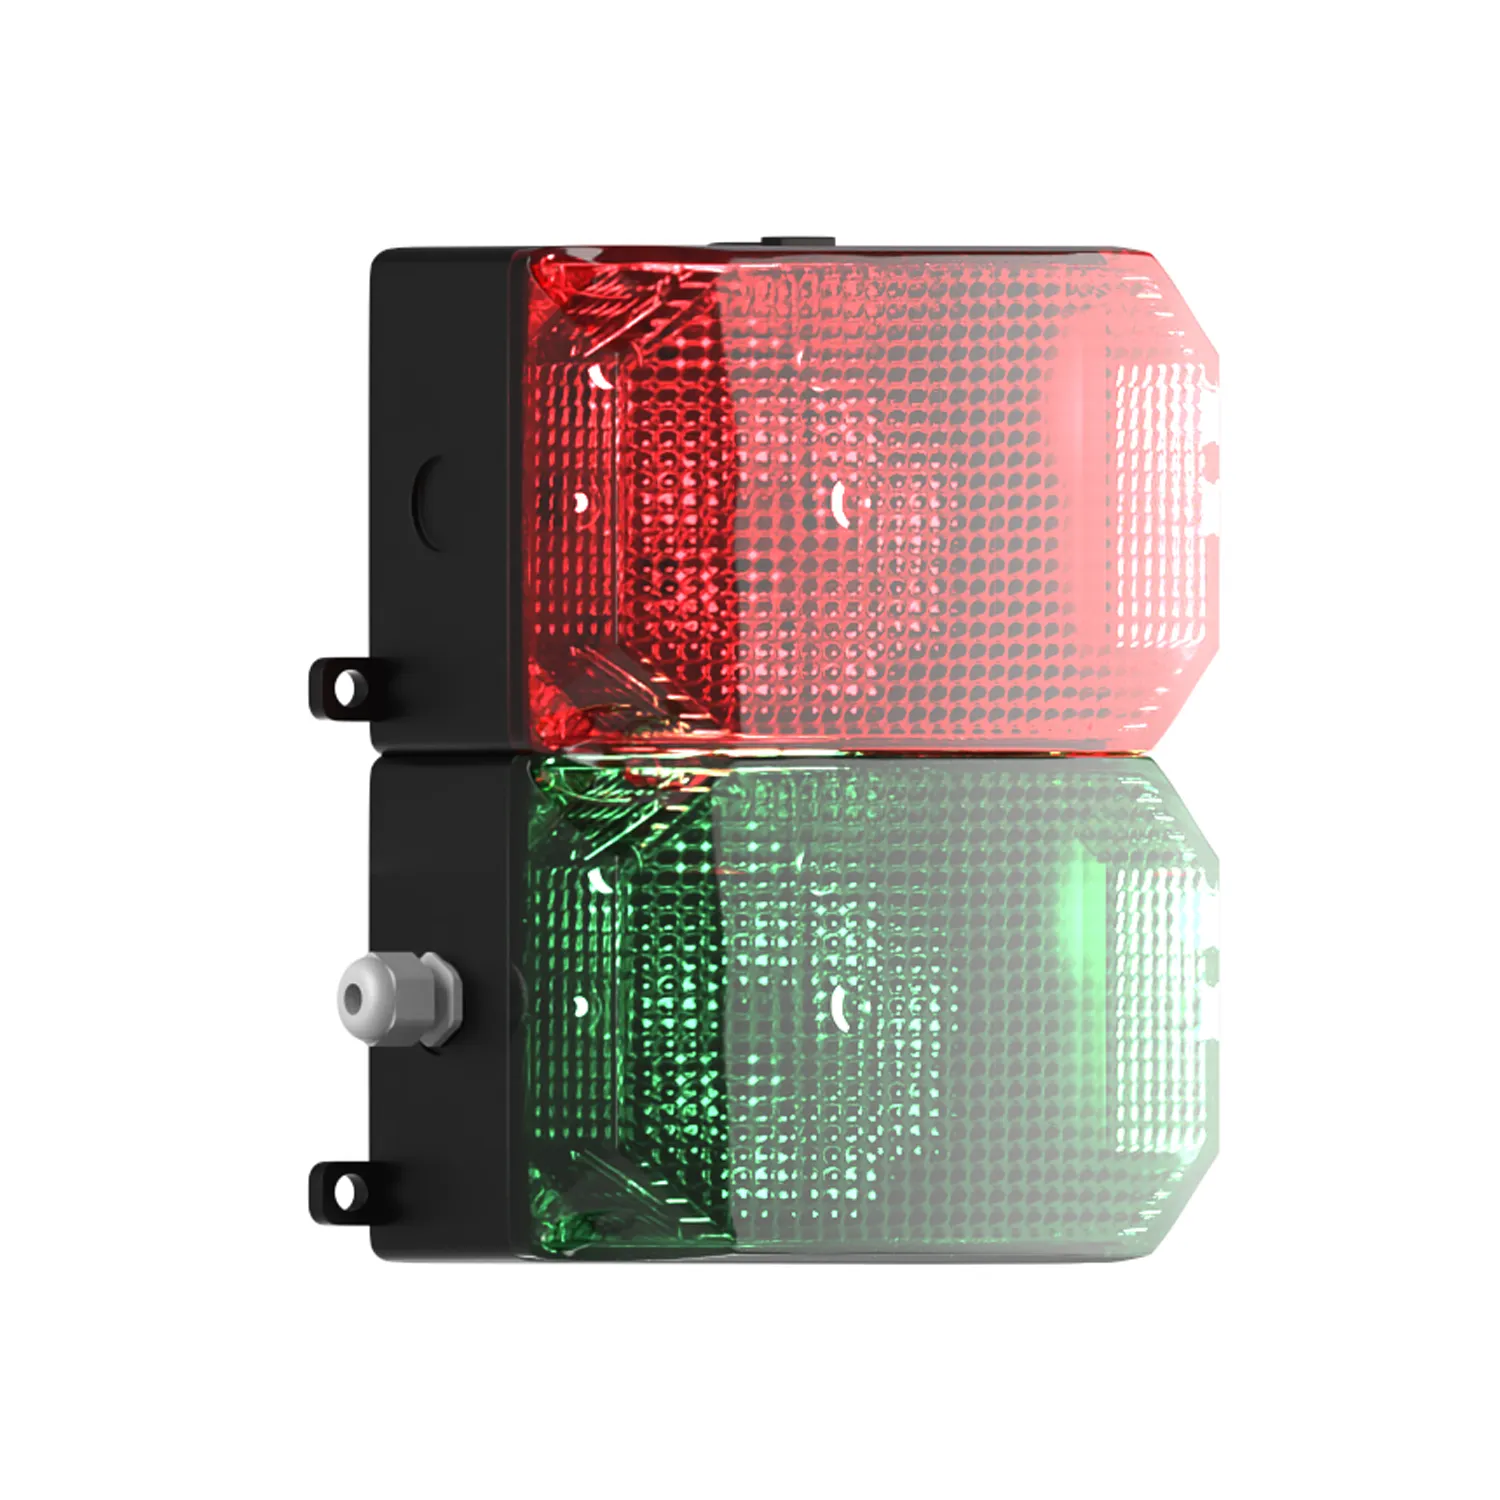 Mesan MS 218 2 Tier SMD LED Cube Warning Light Wall Mounting Multifunction Light Mode Warning Light IP 65 Protection Rate